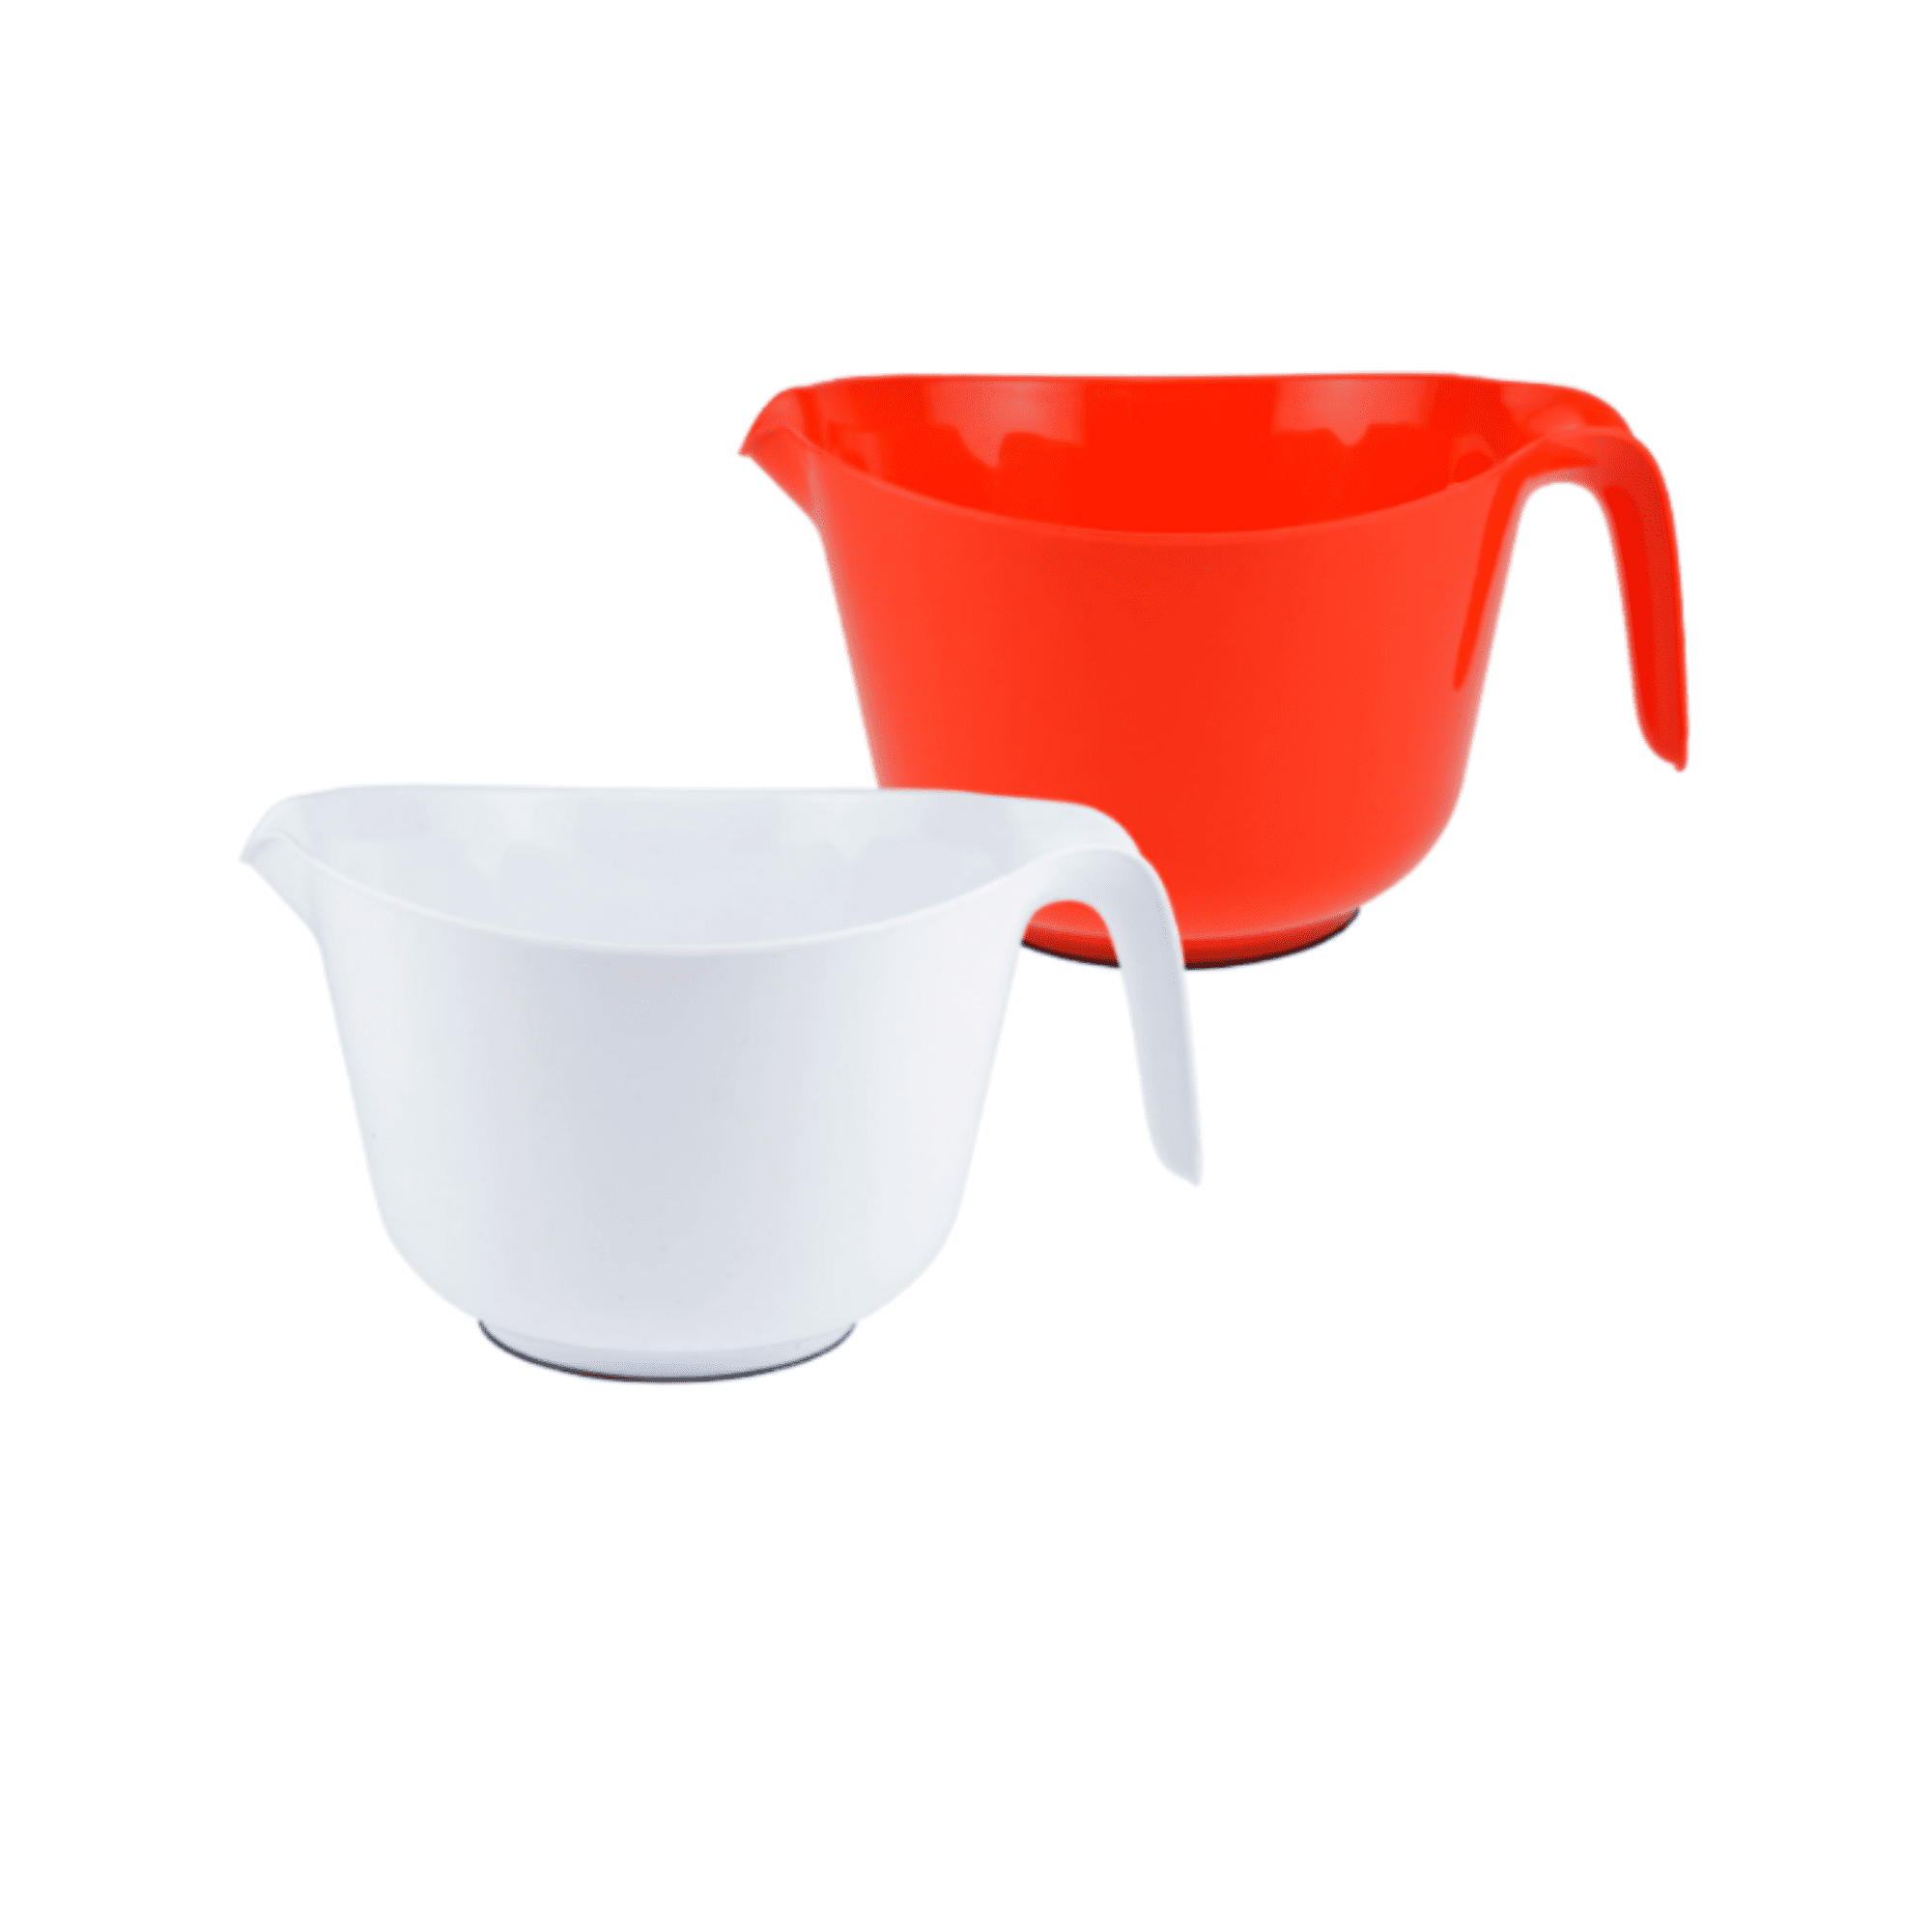 Large Mixing Bowls with Handles, 2 Pcs Microwave Safe 3.6 qt - Plastic  Nesting Bowls for Kitchen, Batter Bowls, Easy to Clean, White & Red